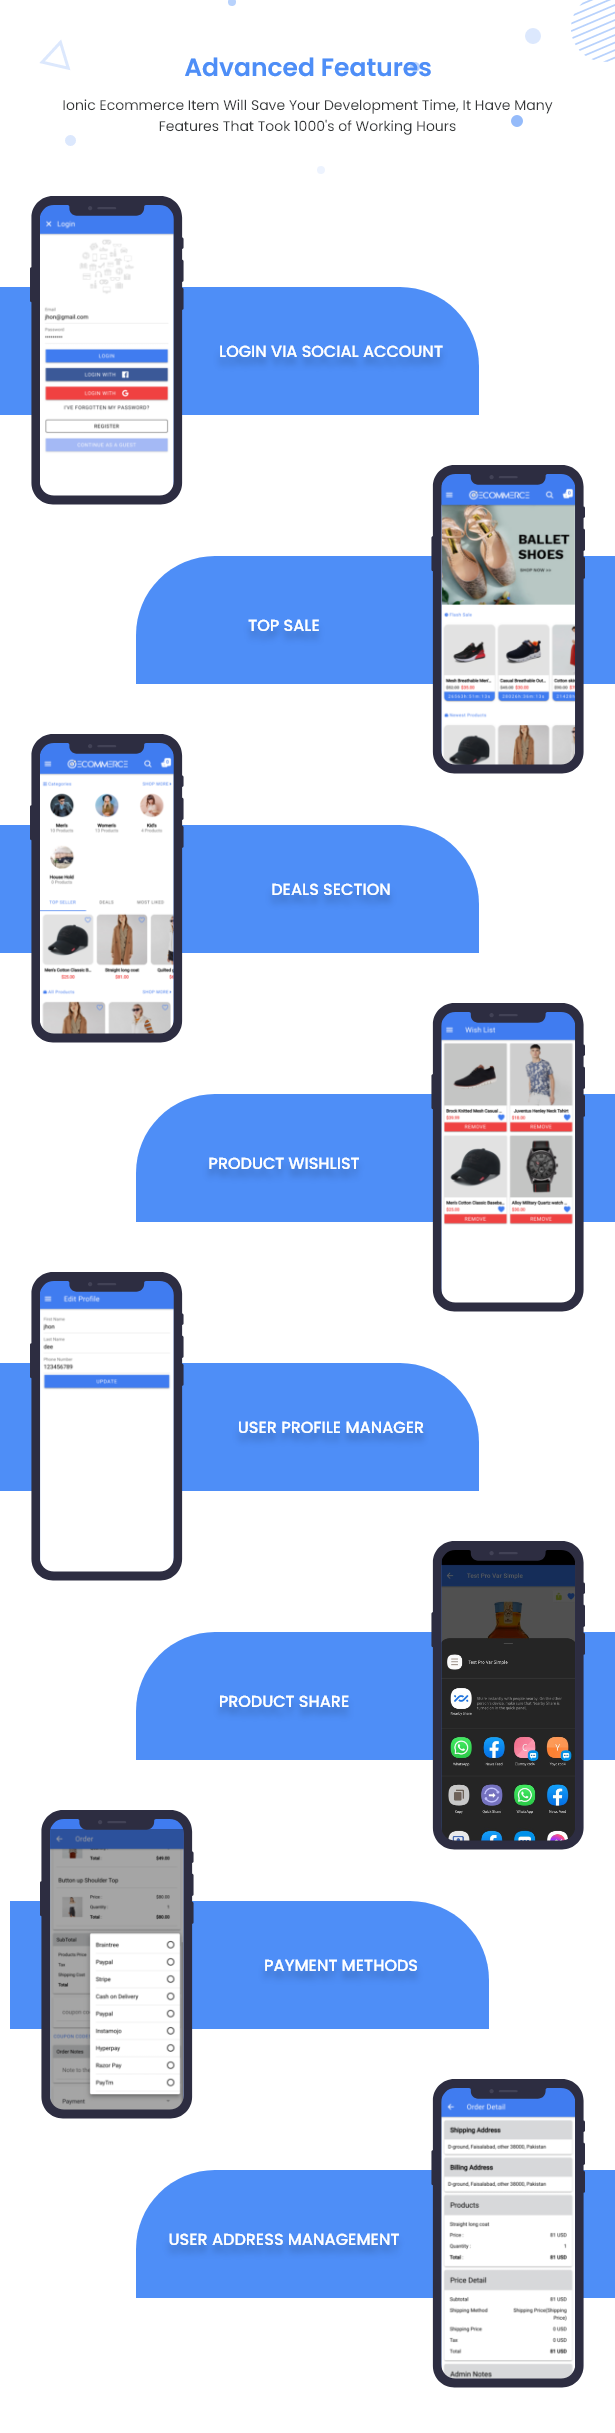 Ionic5 Ecommerce - Universal iOS & Android Ecommerce / Store Full Mobile App with Laravel CMS - 23